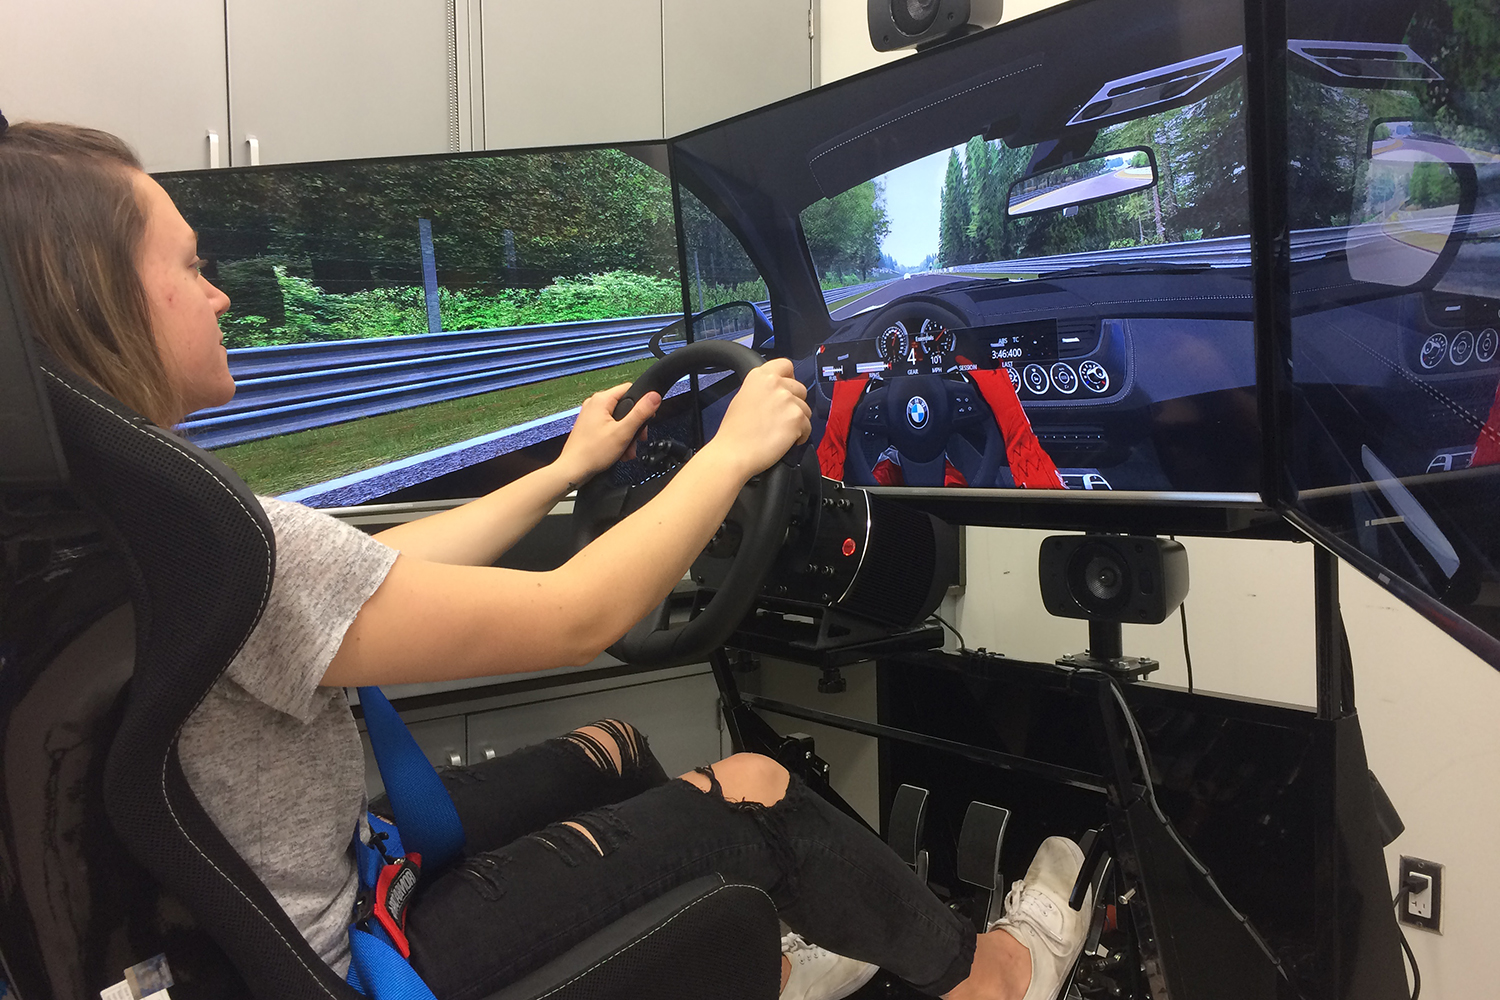 Driving Simulator Helps Patients Become Road-Ready